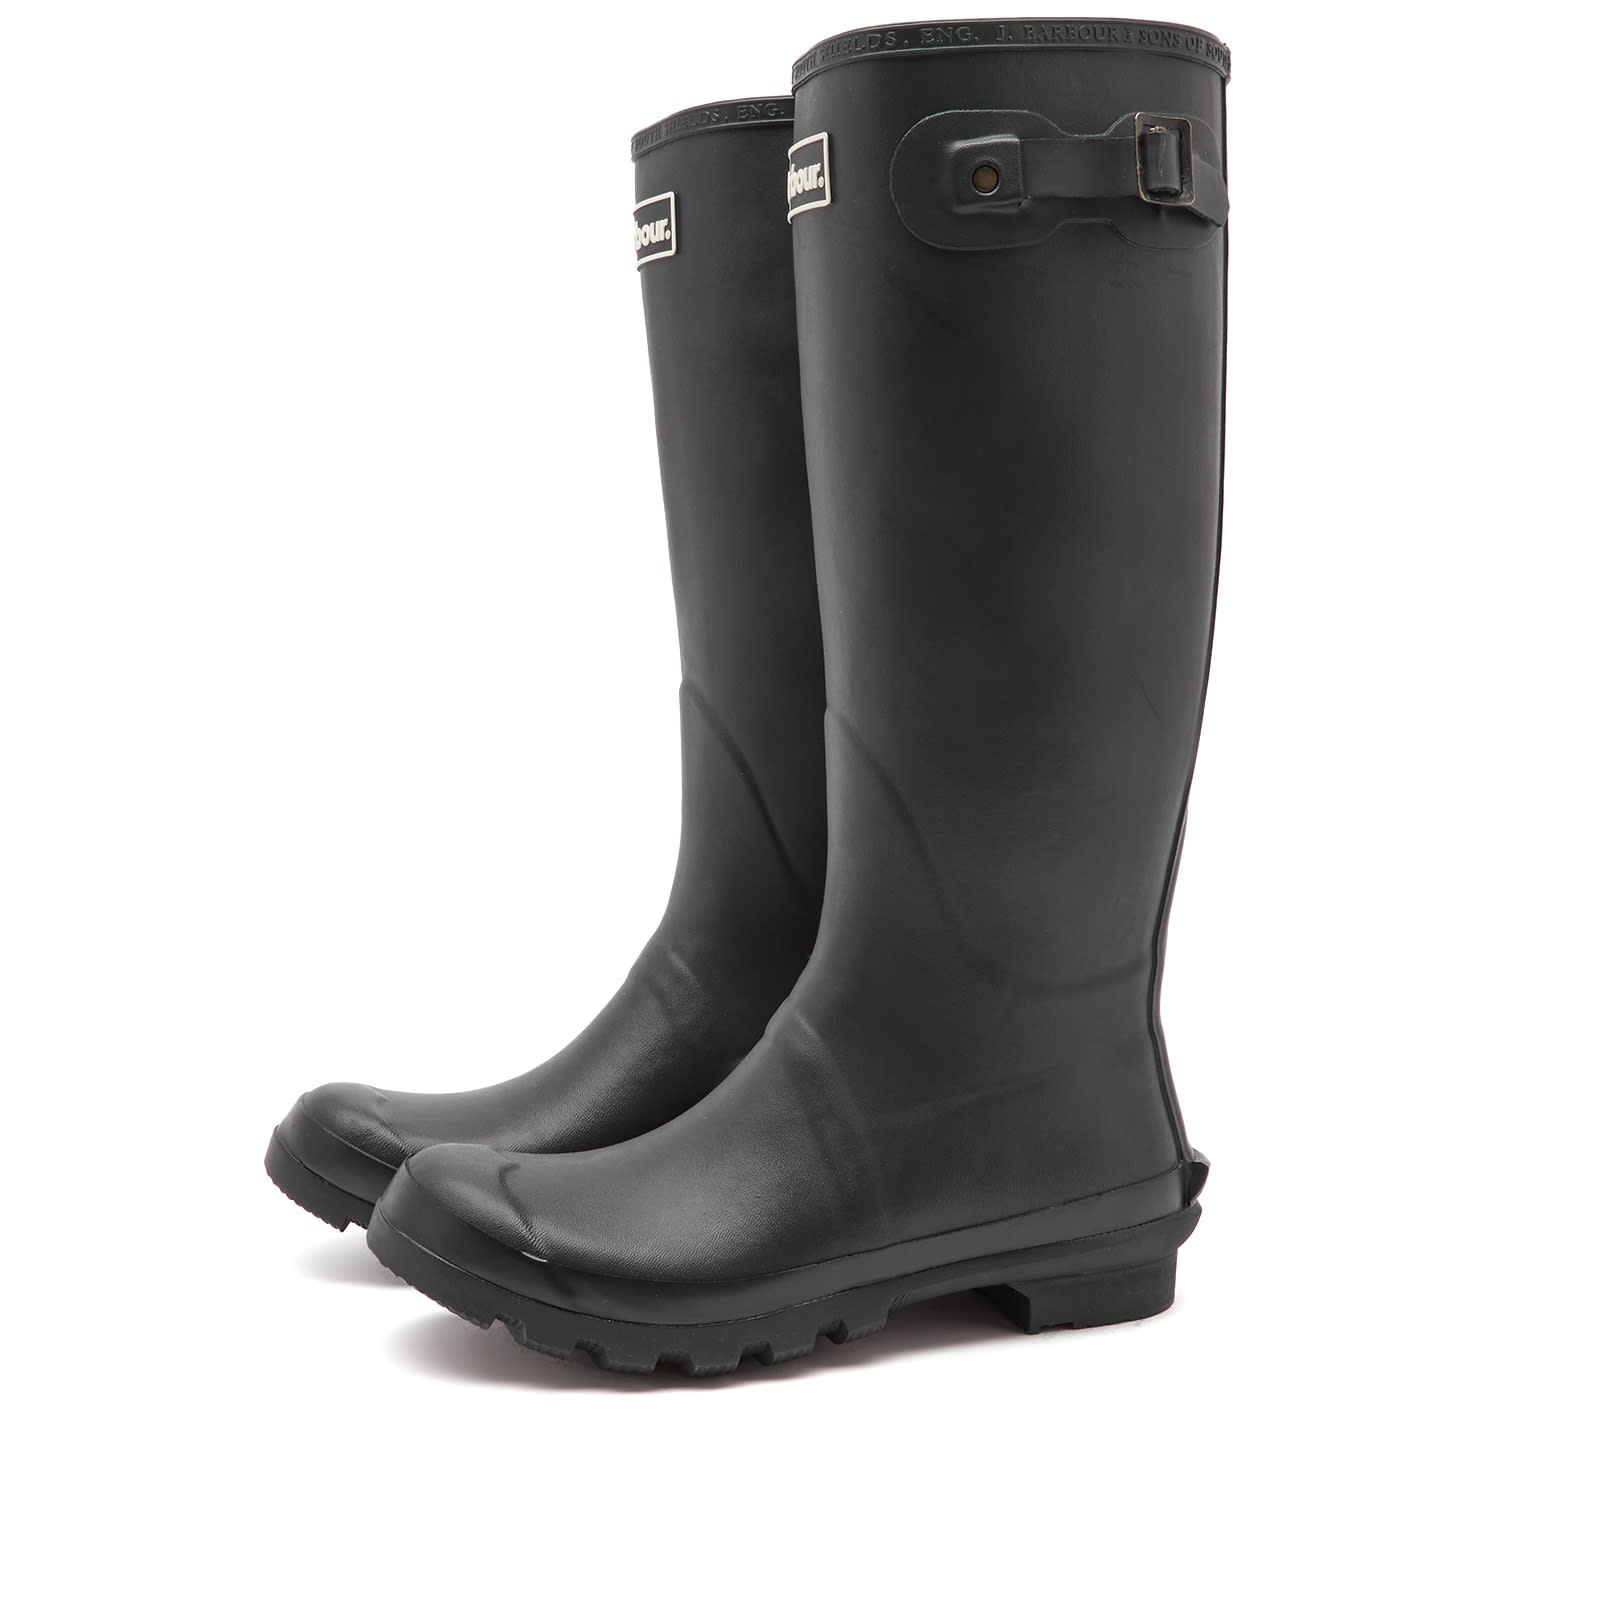 Barbour Bede Wellie Boots - 1